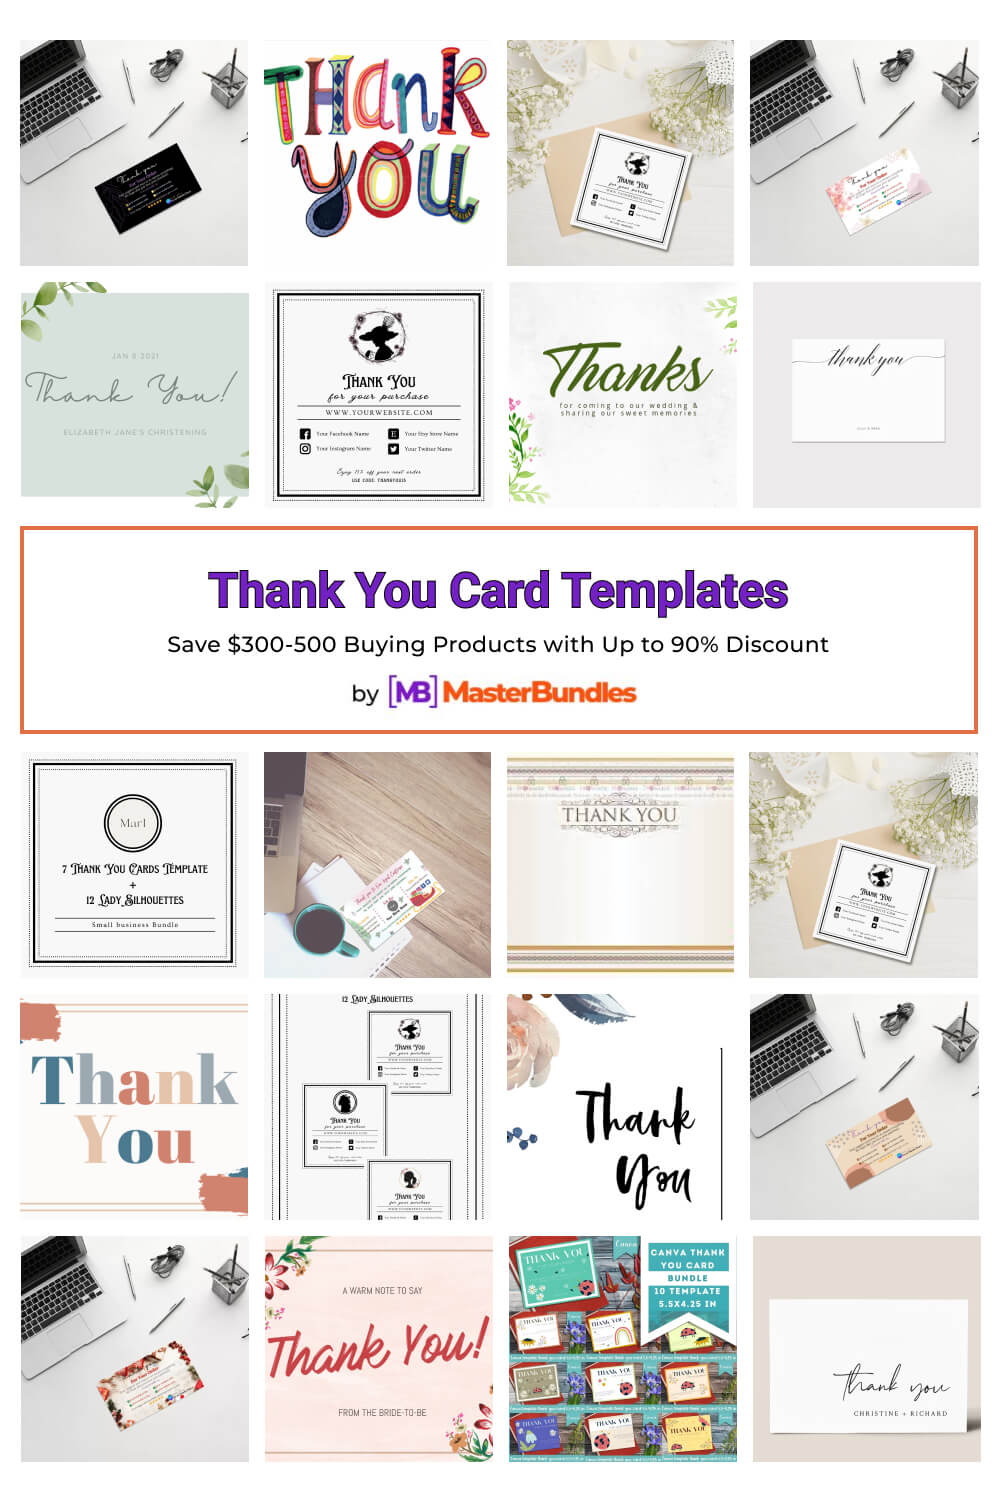 thank you card templates pinterest image.